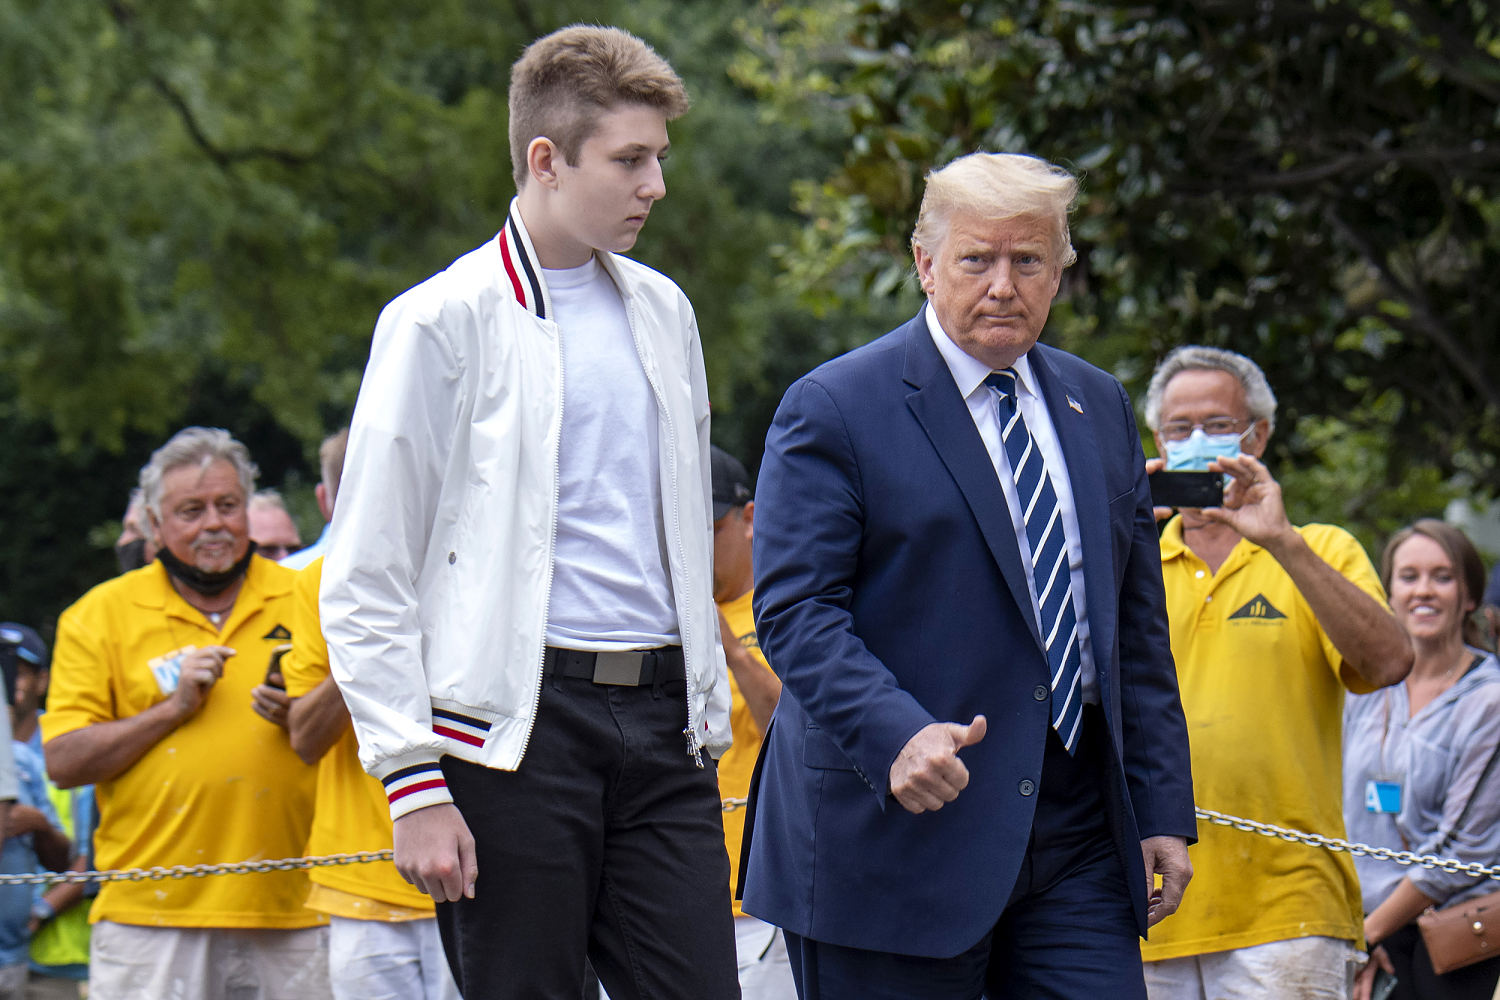 Trump gets his son Barron’s age wrong in TV interview